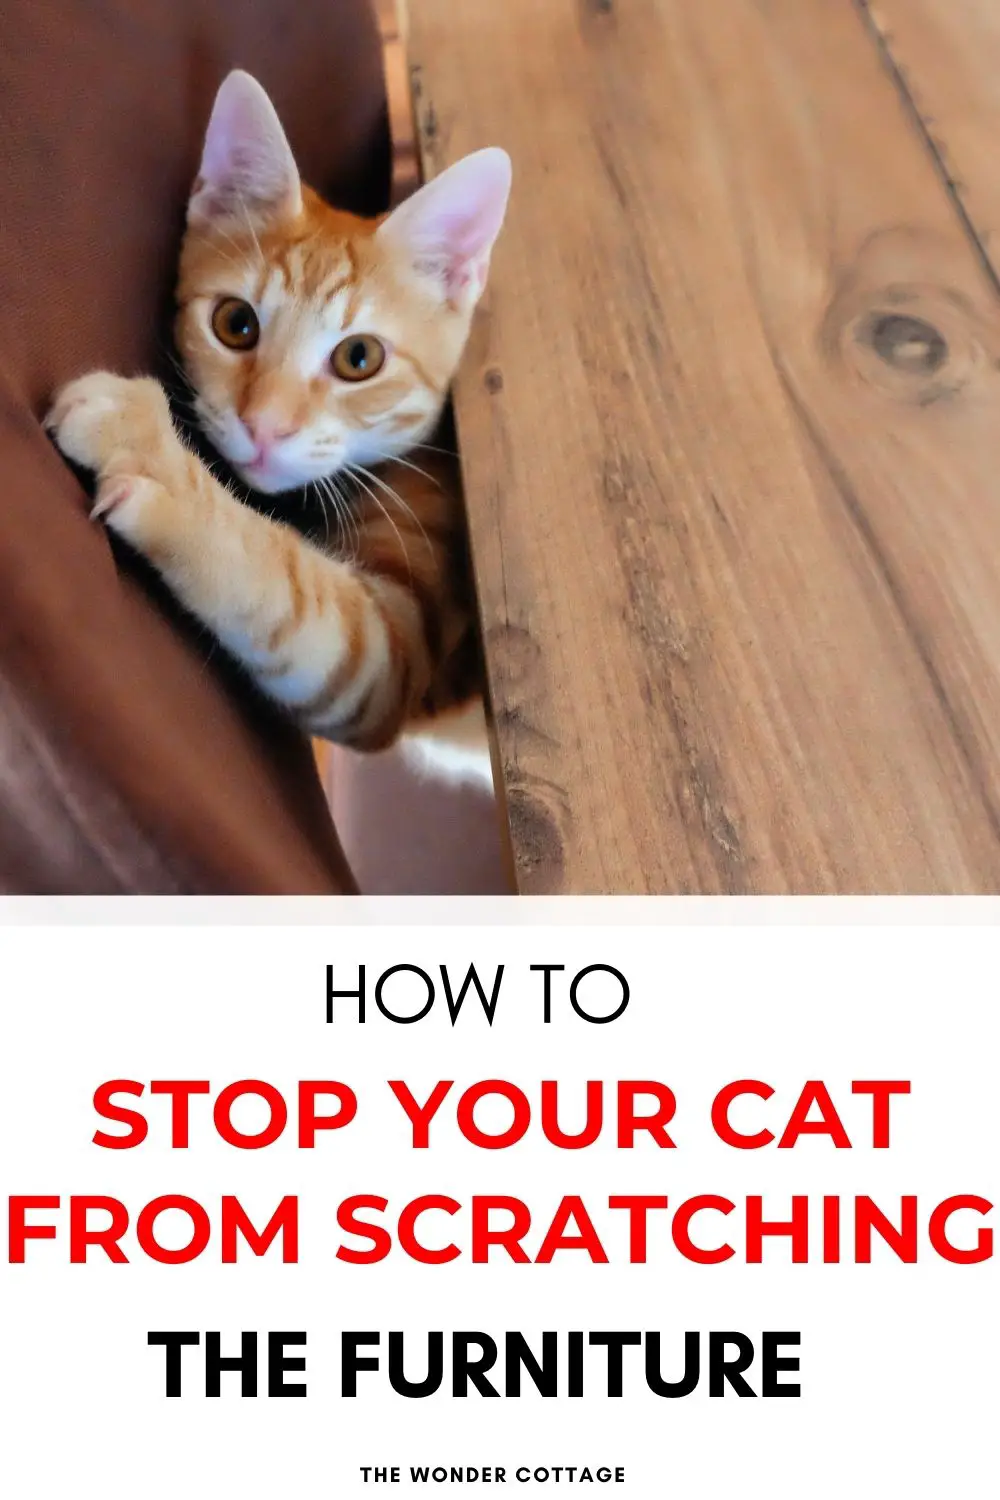 How to stop your cat from scratching the furniture